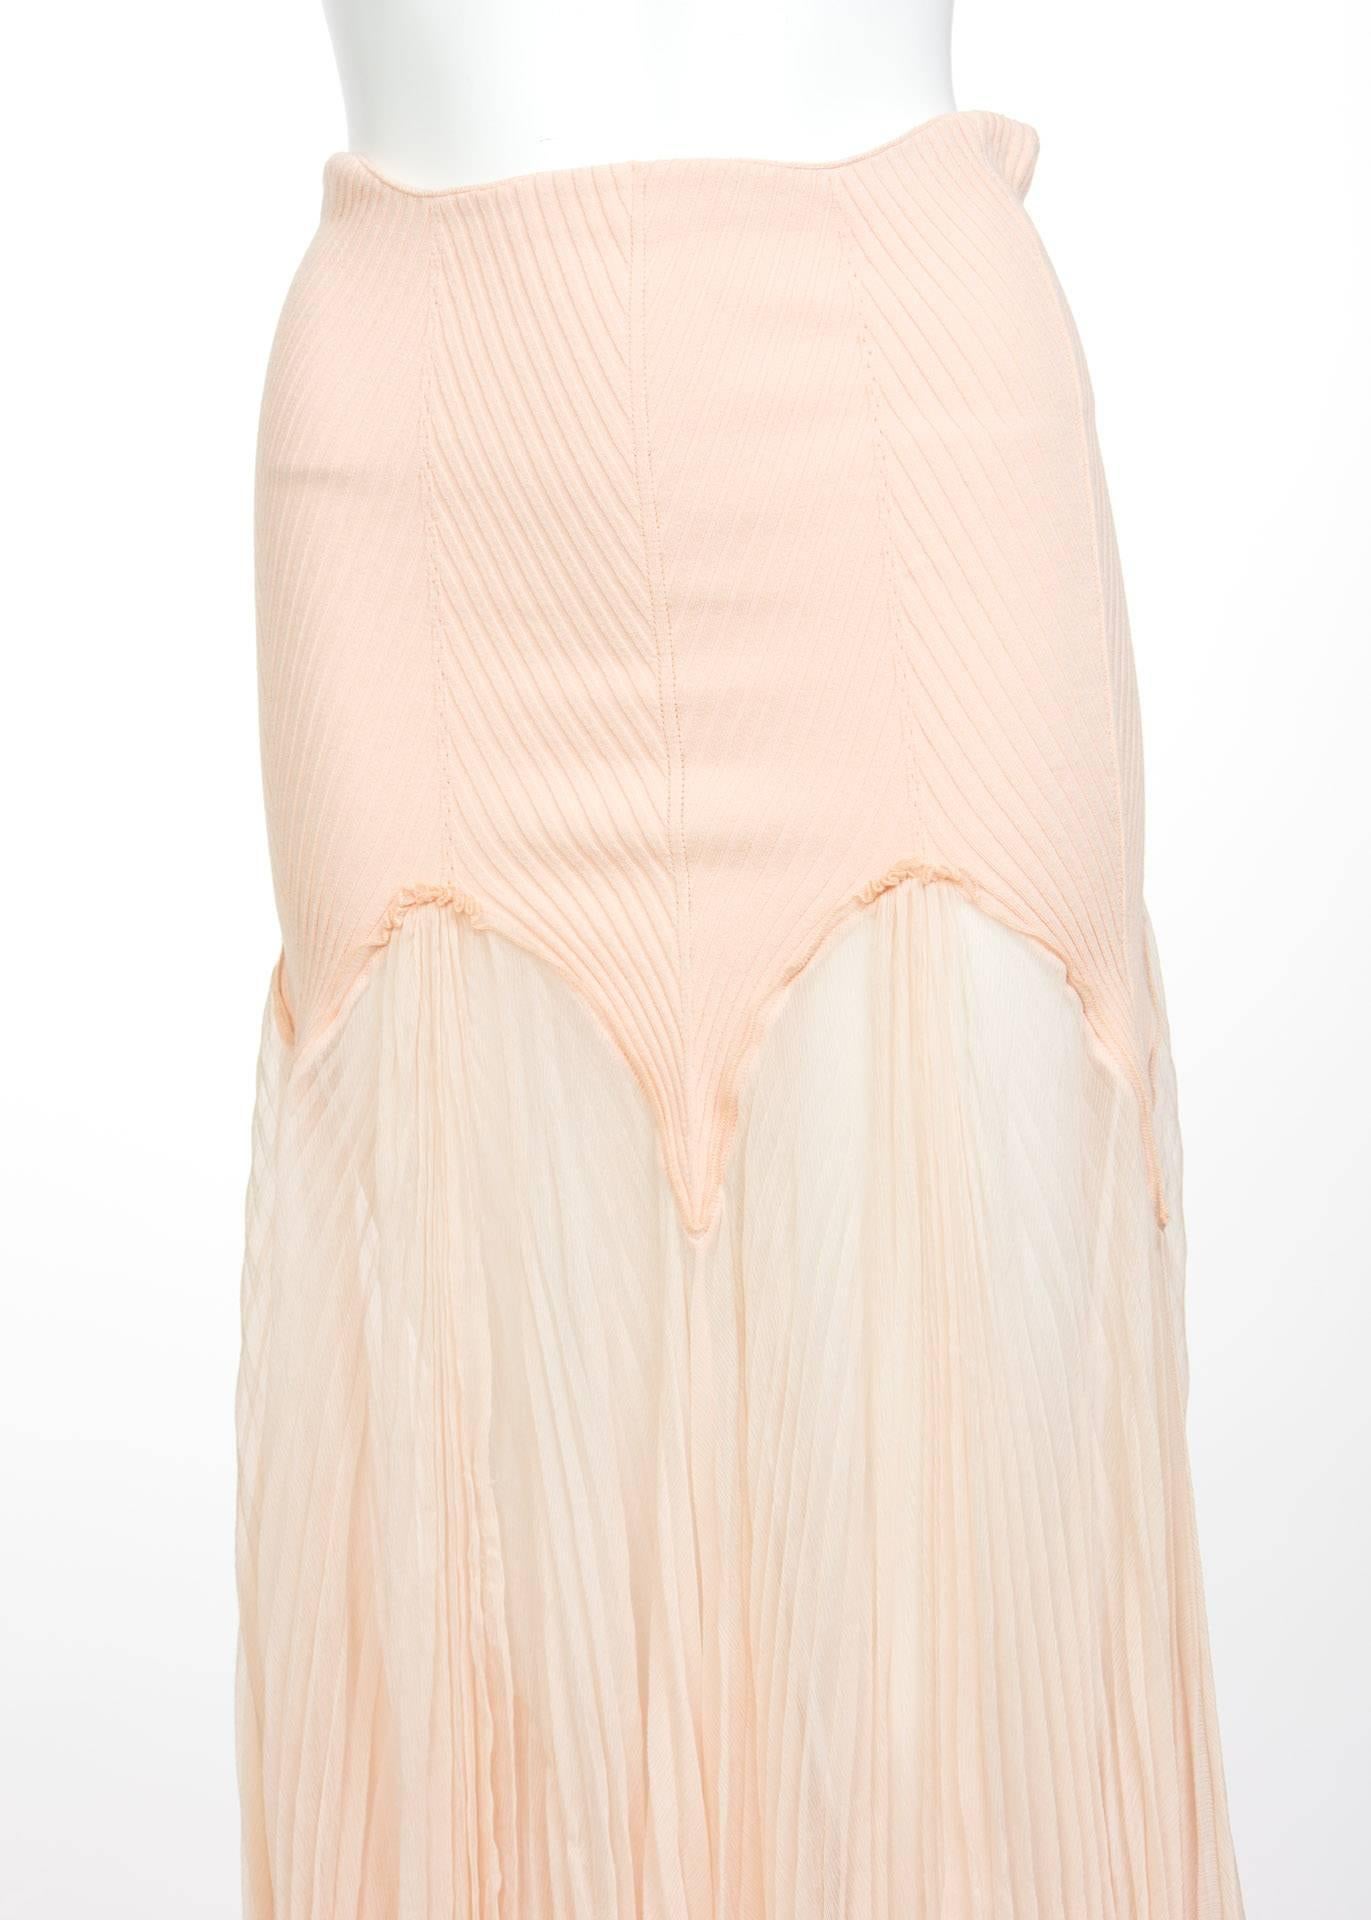 Jean Paul Gaultier Blush Crinkle Silk Chiffon Rib Knit Yoke Skirt, 2000s In Excellent Condition For Sale In Boca Raton, FL